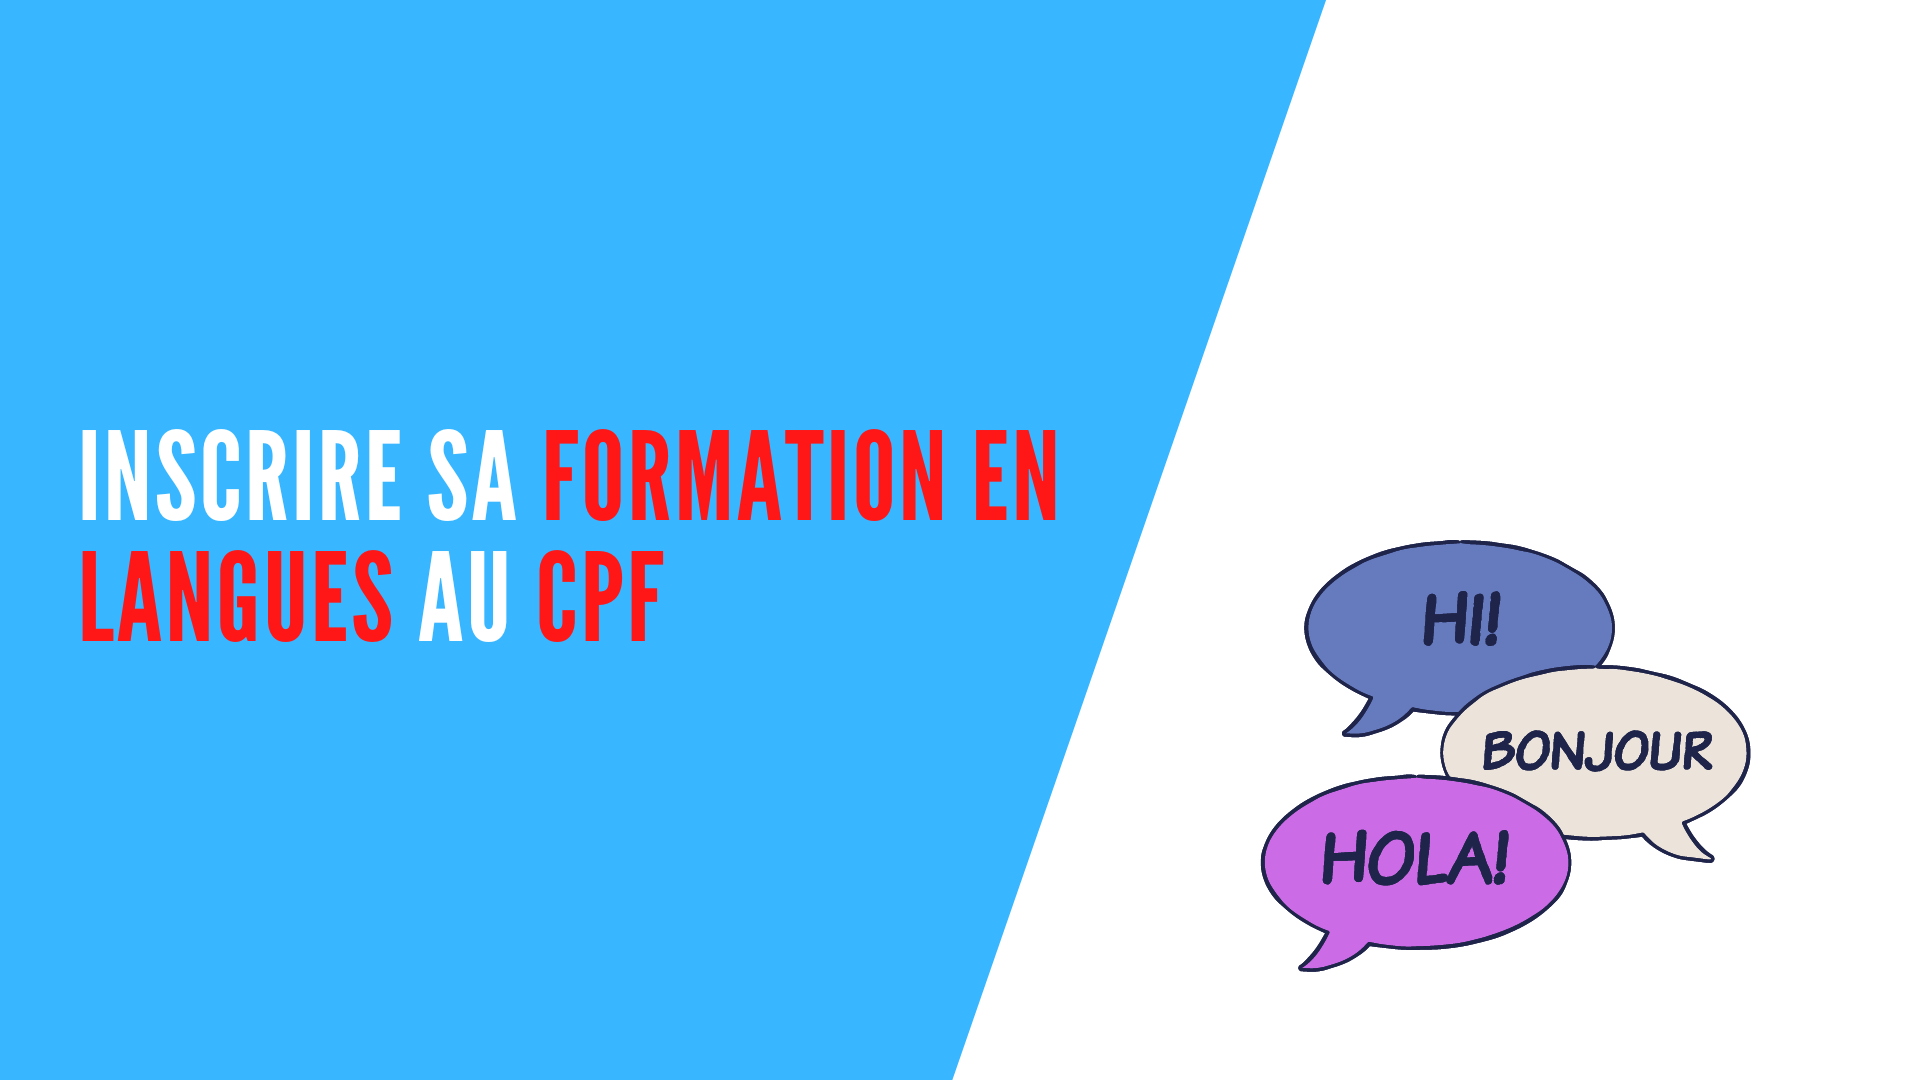 You are currently viewing Inscrire sa formation en langues au CPF